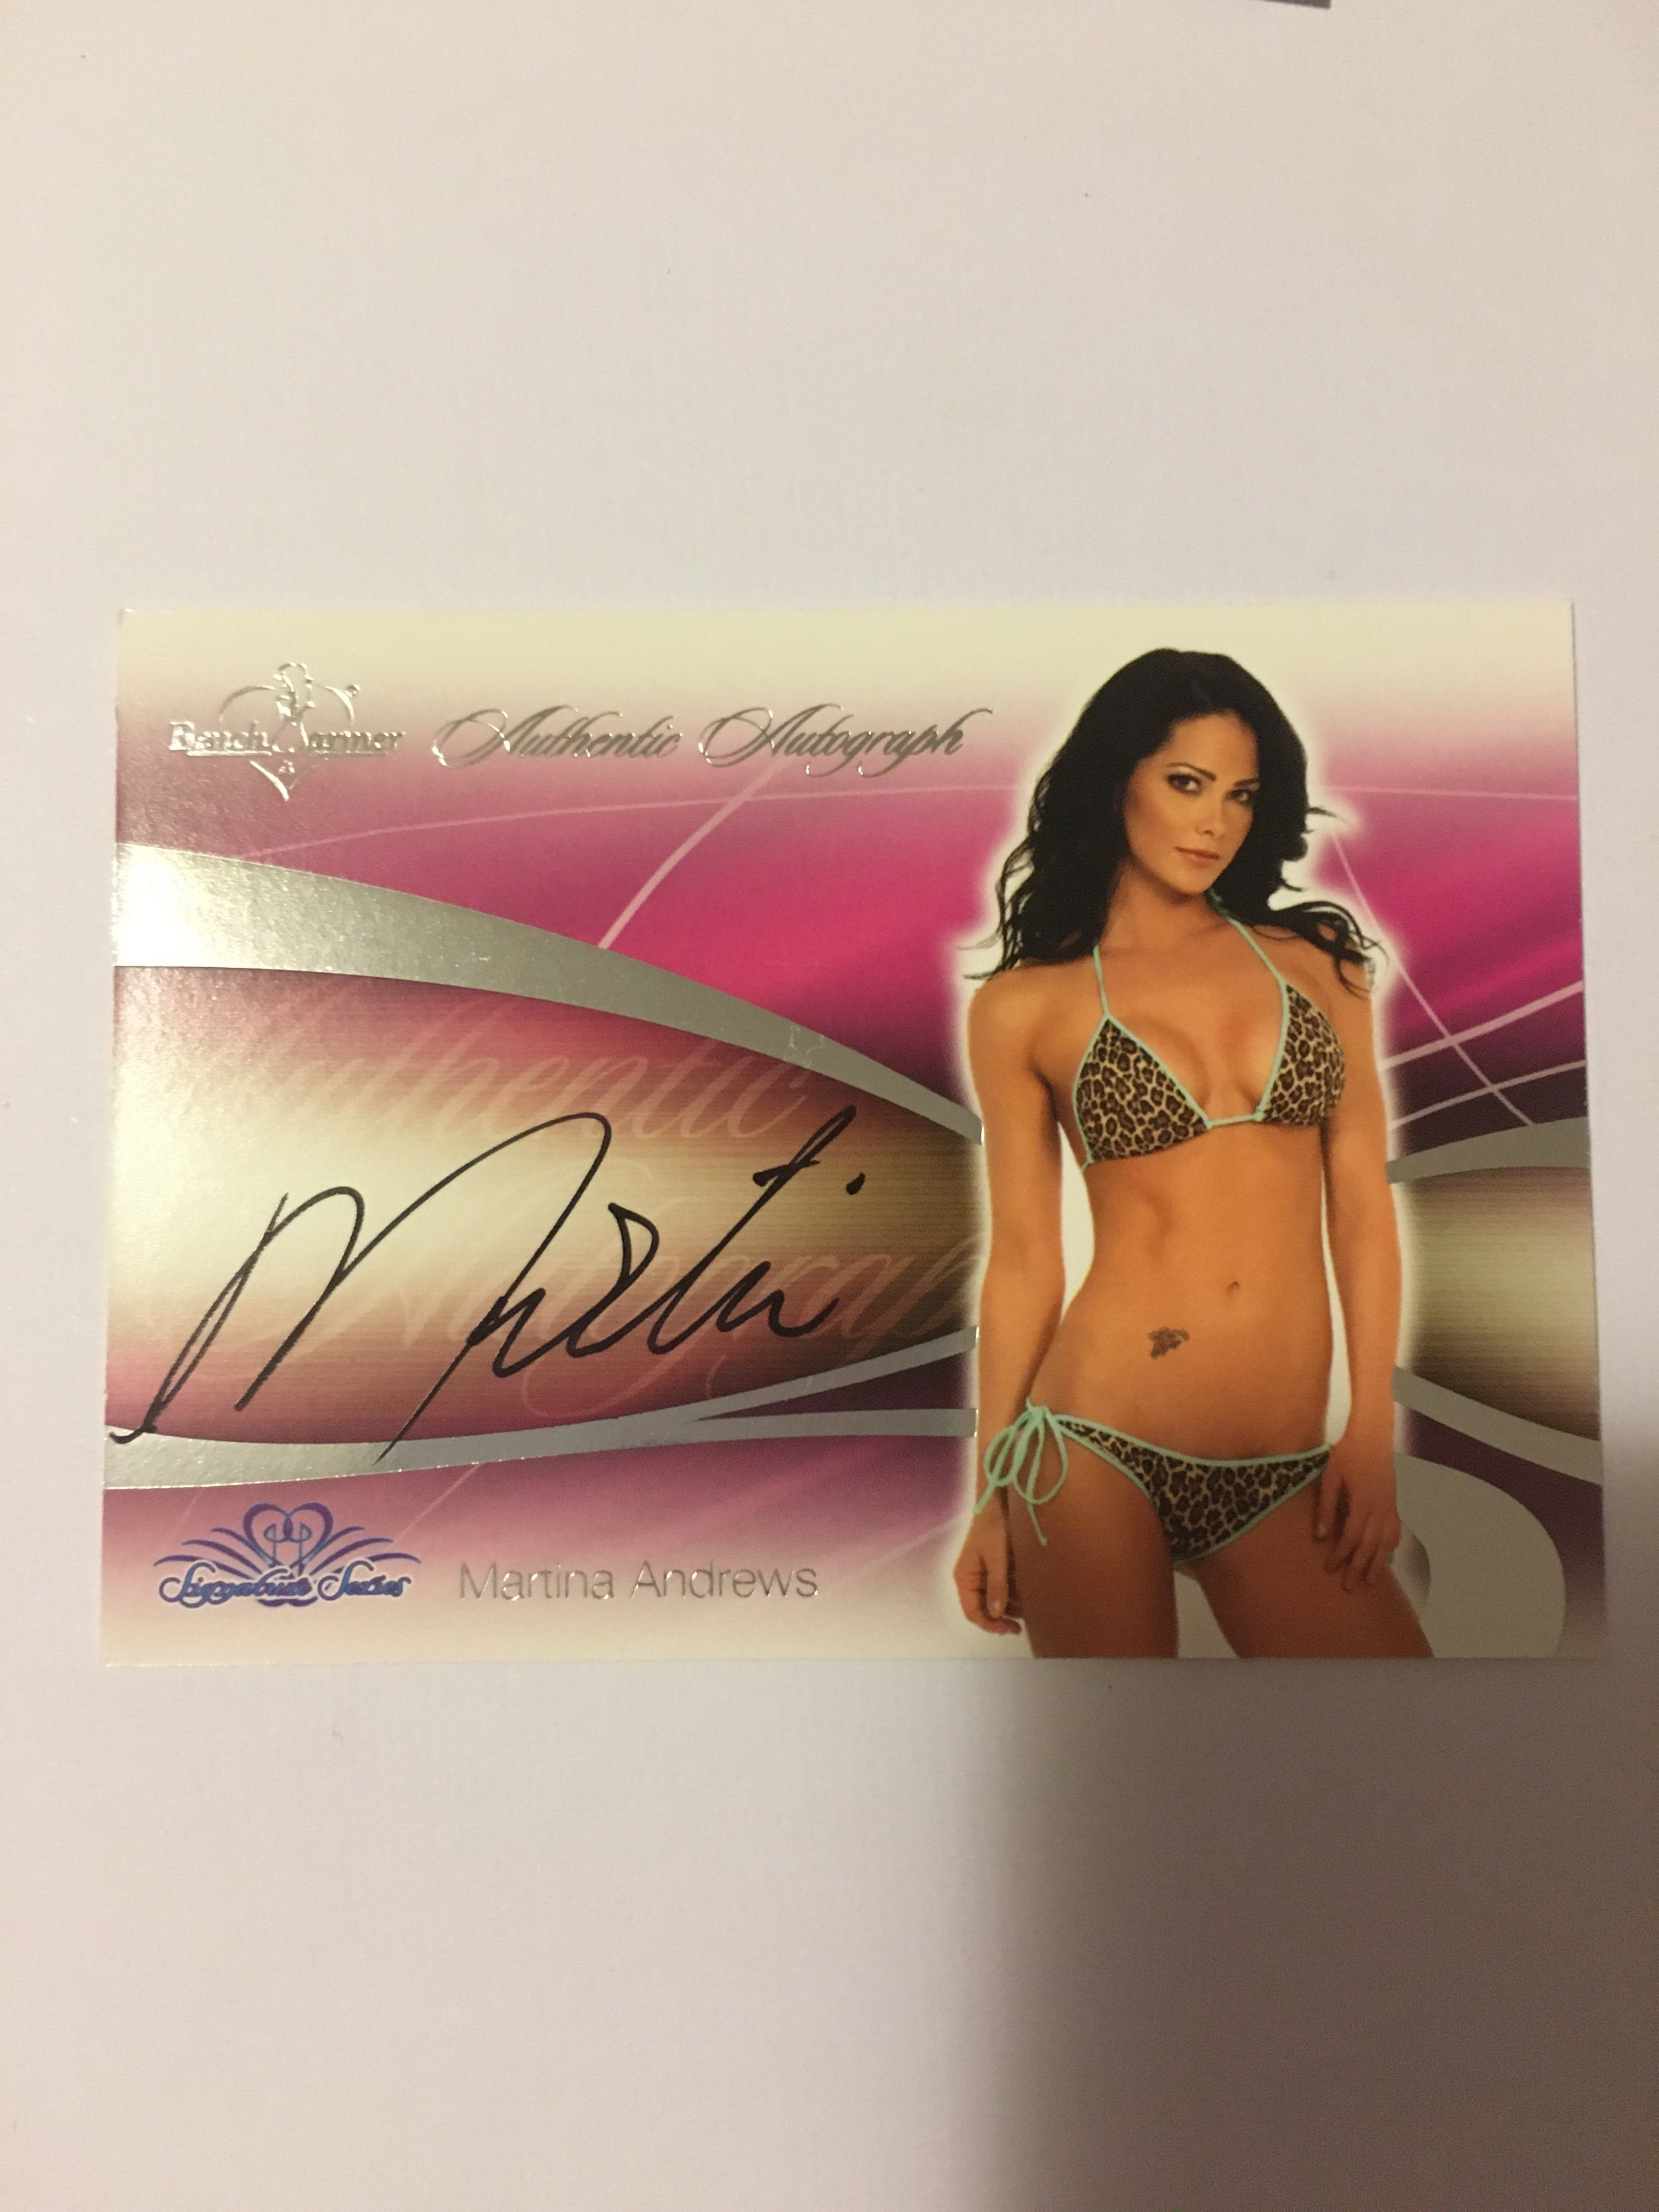 Martina Andrews - Autographed Benchwarmer Trading Card (2)